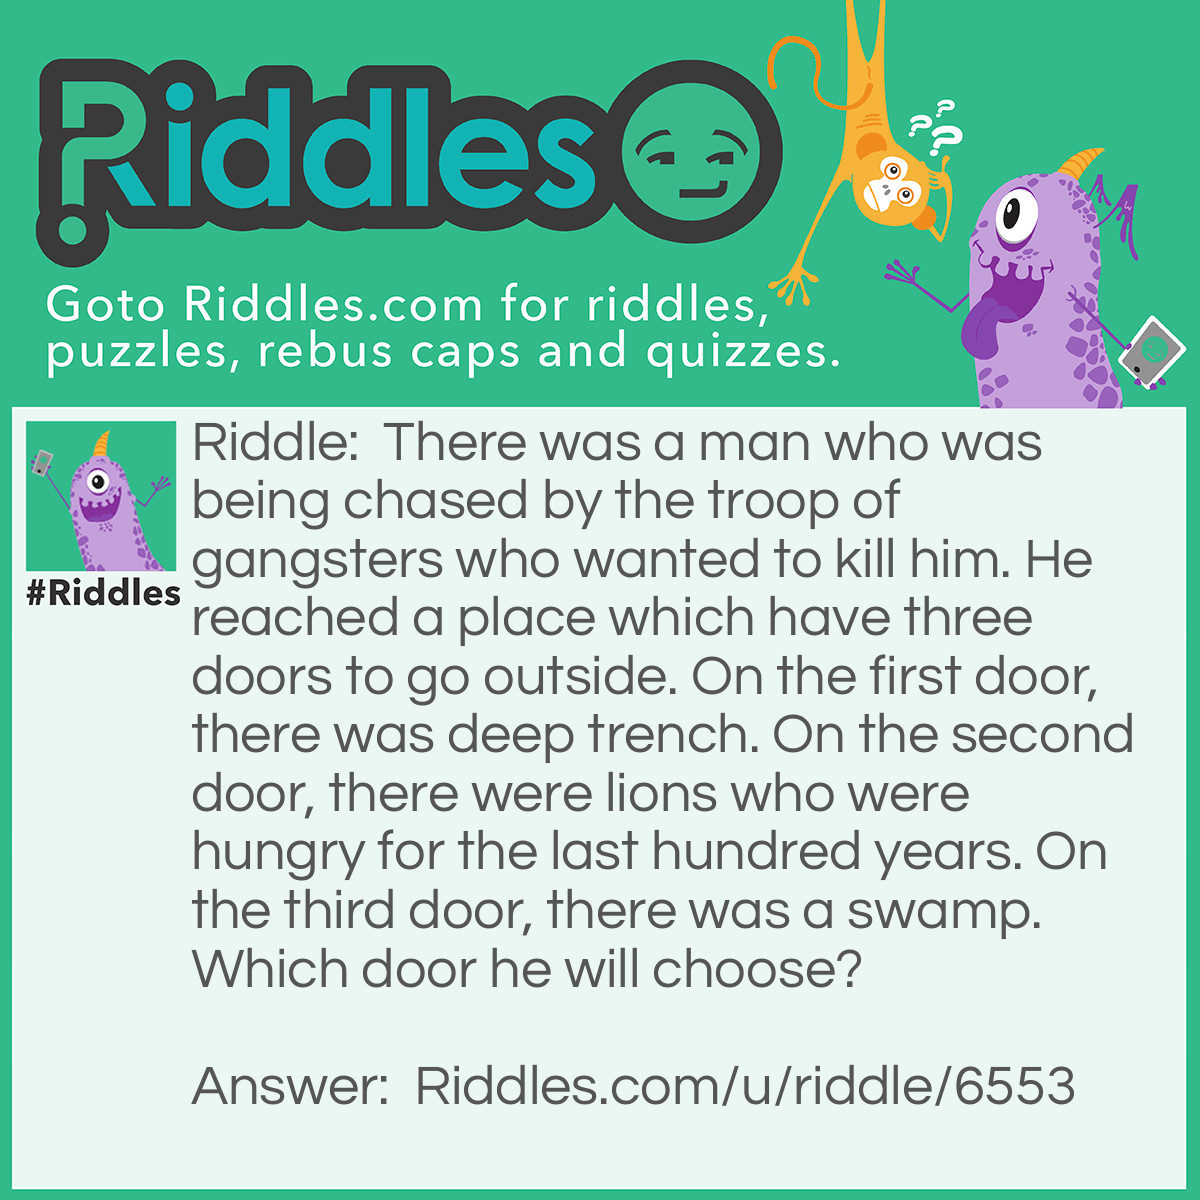 Riddle: There was a man who was being chased by the troop of gangsters who wanted to kill him. He reached a place which have three doors to go outside. On the first door, there was deep trench. On the second door, there were lions who were hungry for the last hundred years. On the third door, there was a swamp. Which door he will choose? Answer: He will choose the second door because the lions are dead because they were hungry for the last hundred years